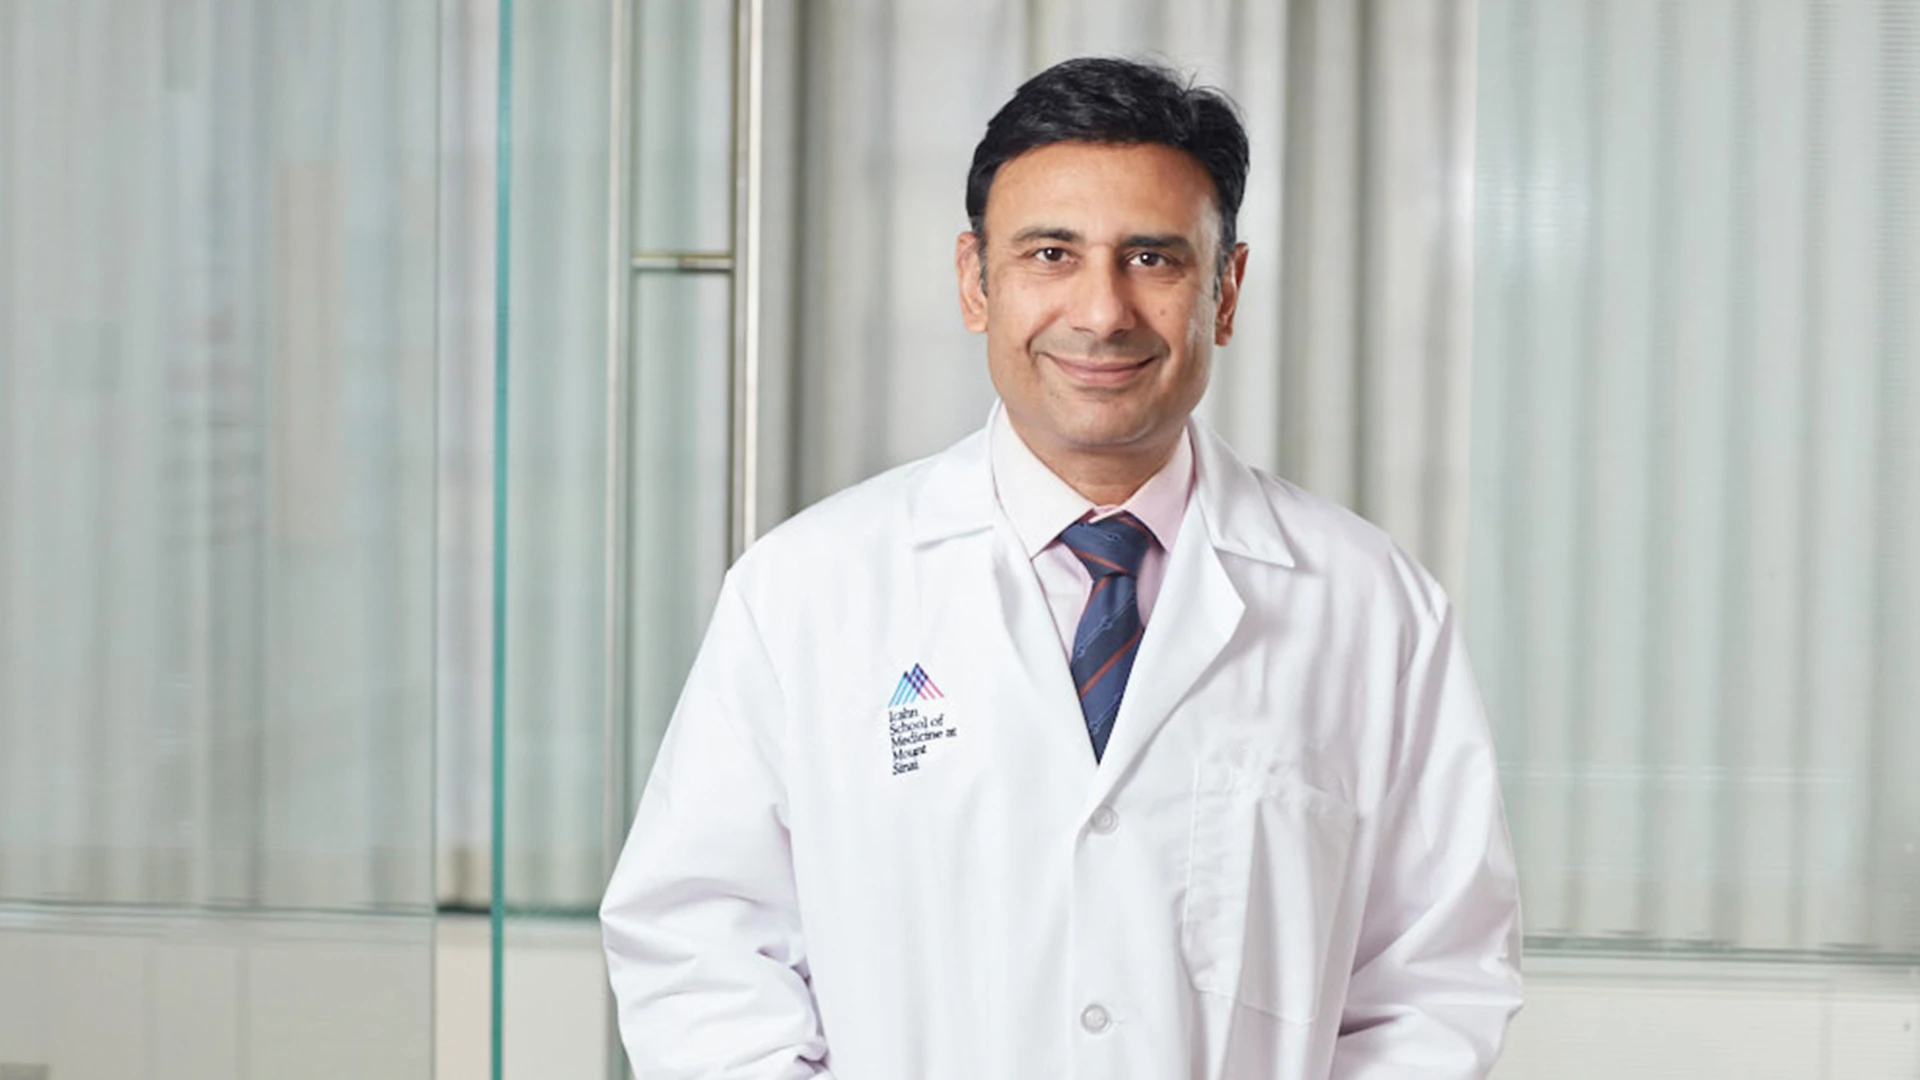 Mantu Gupta, MD, Site Chair of Urology at Mount Sinai West and Mount Sinai Morningside, and Professor of Urology at the Icahn School of Medicine at Mount Sinai, a pioneer in percutaneous nephrolithotomy (PCNL) procedures.







